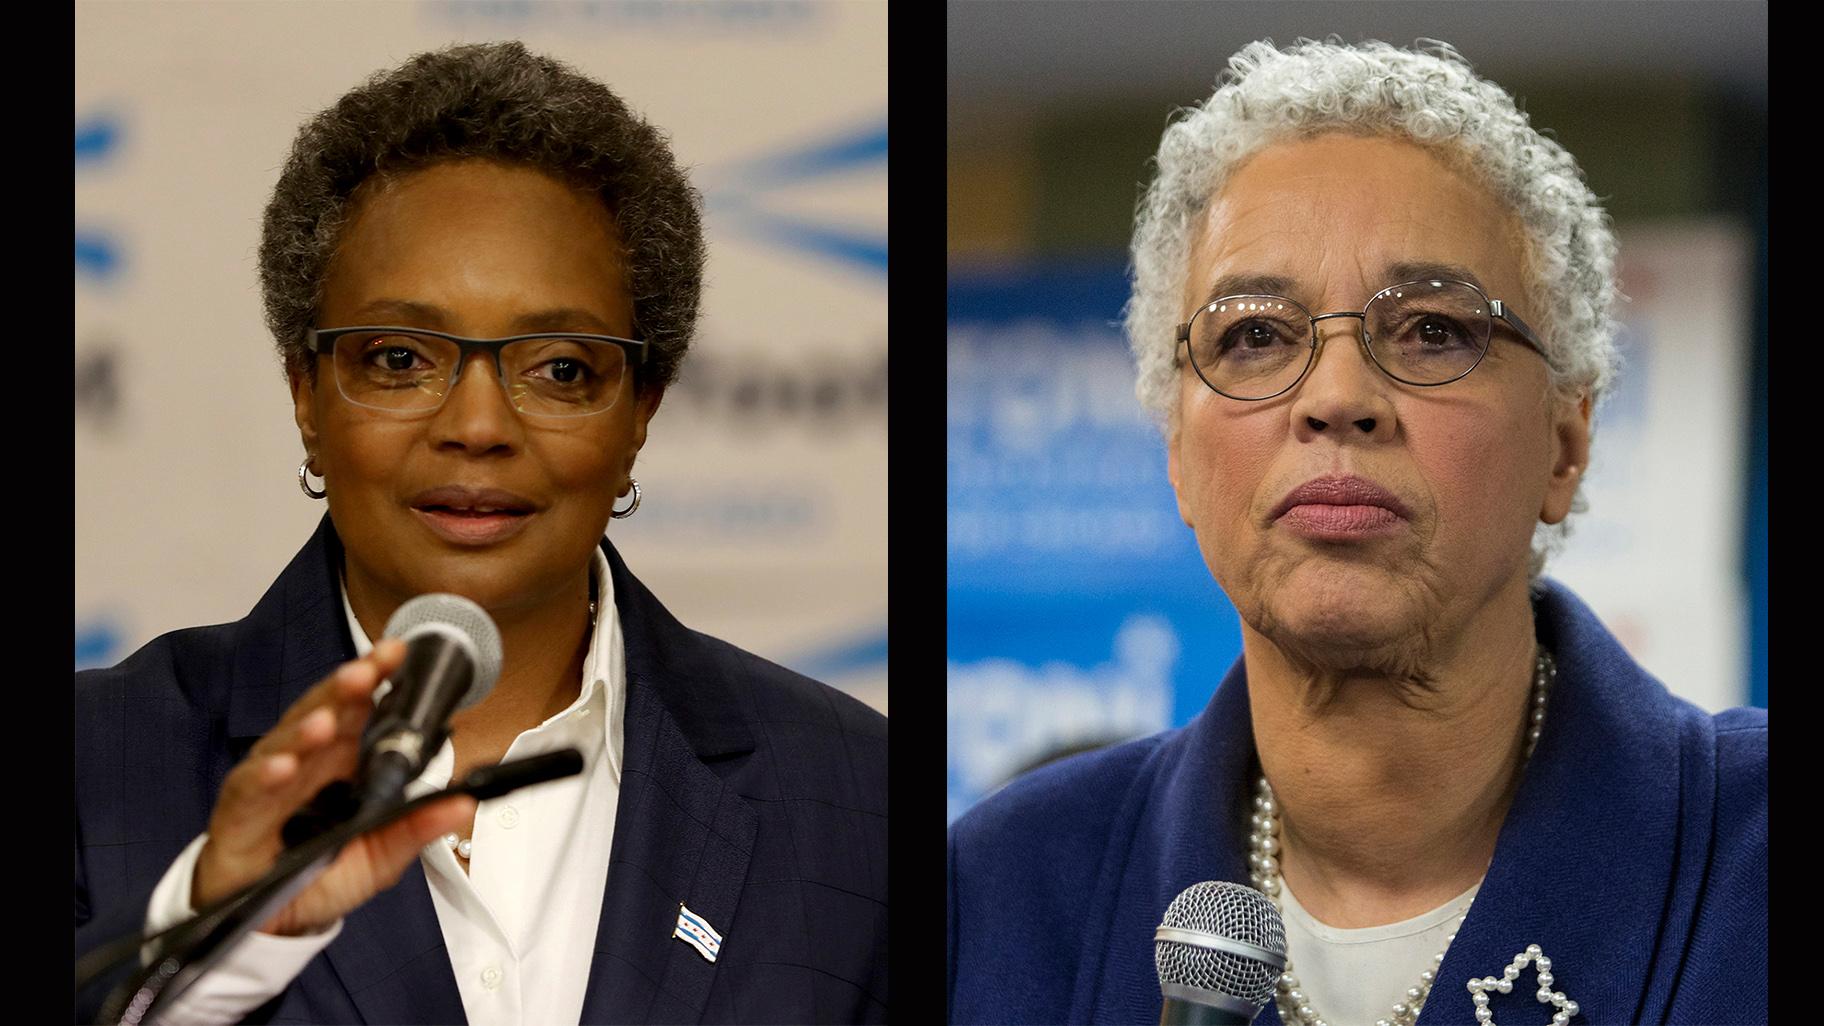 Mayoral candidates Lori Lightfoot, left, and Toni Preckwinkle give speeches Tuesday, Feb. 26 at their respective election night parties. (Photos by Tyler LaRiviere and Ashlee Rezin / Chicago Sun-Times via AP)